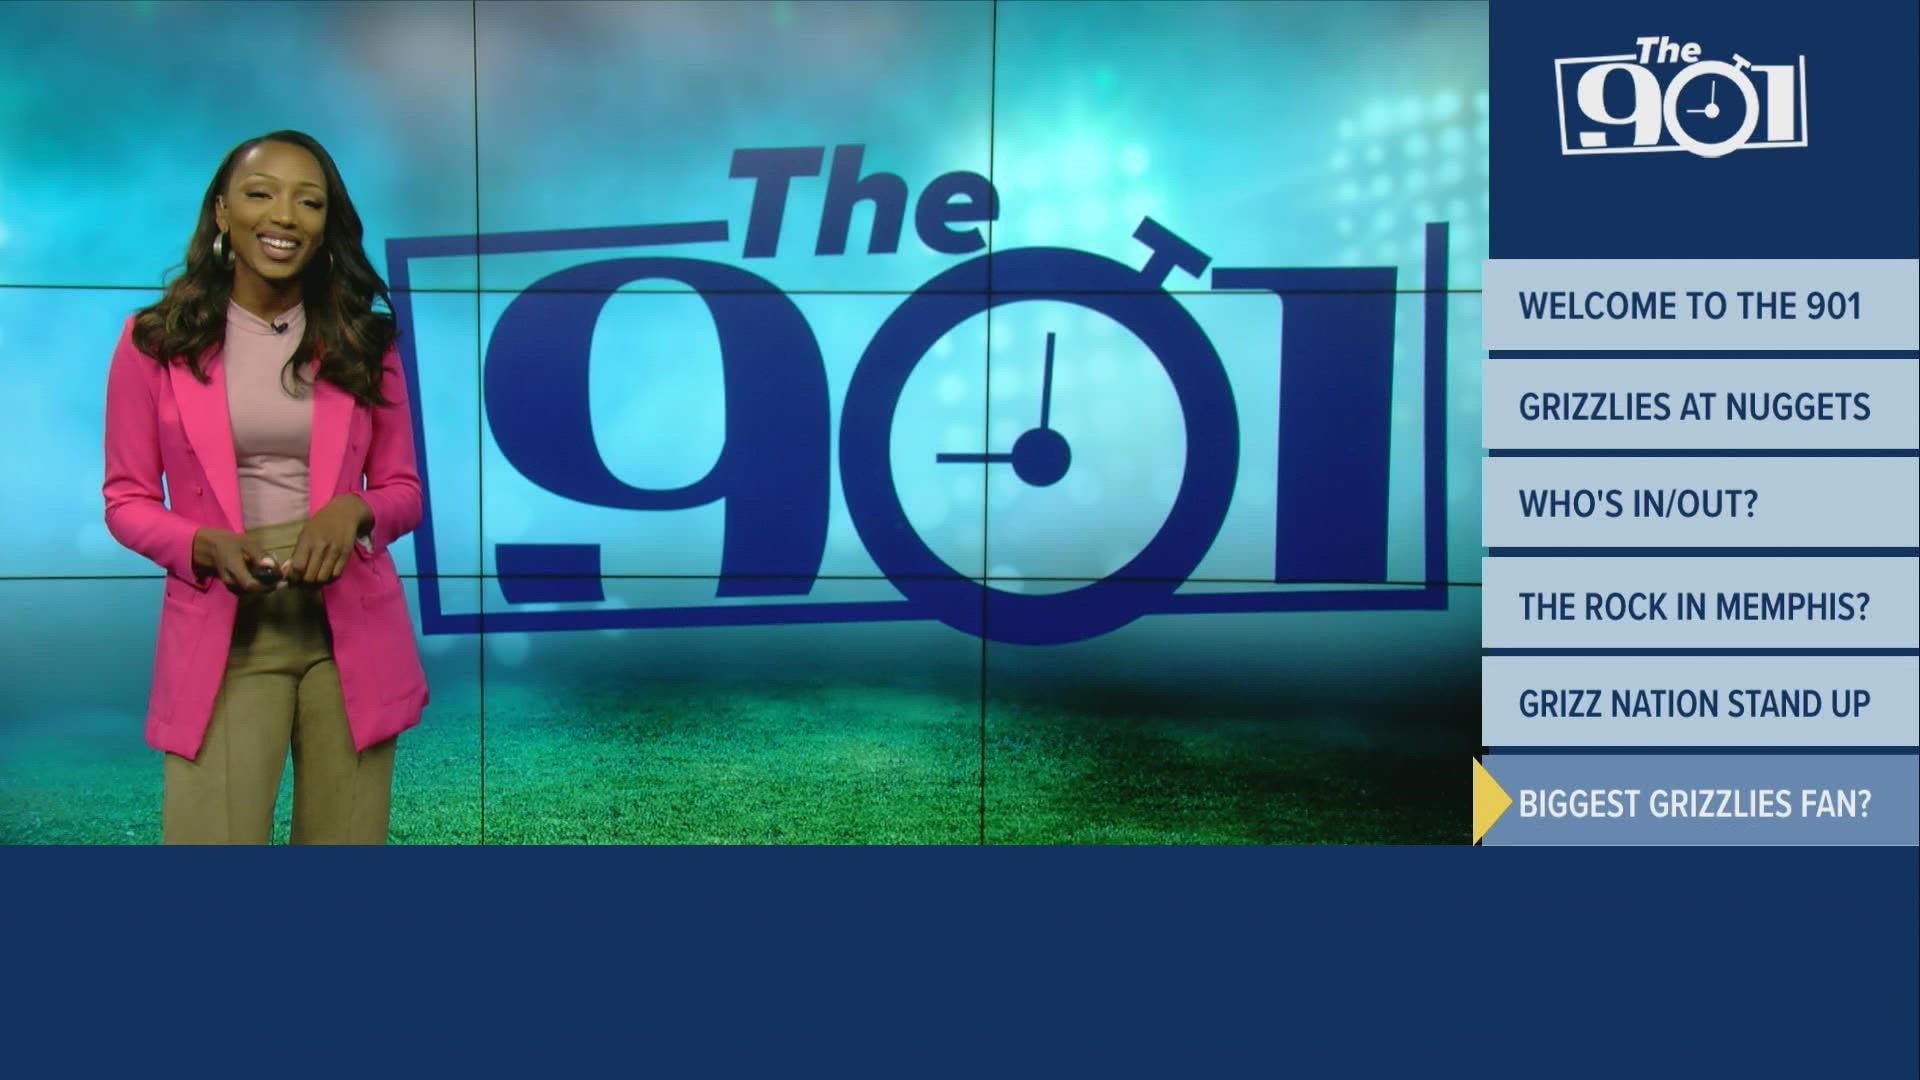 Erin Wilson gets you up to speed on everything Memphis sports in Thursday's episode of The 901.